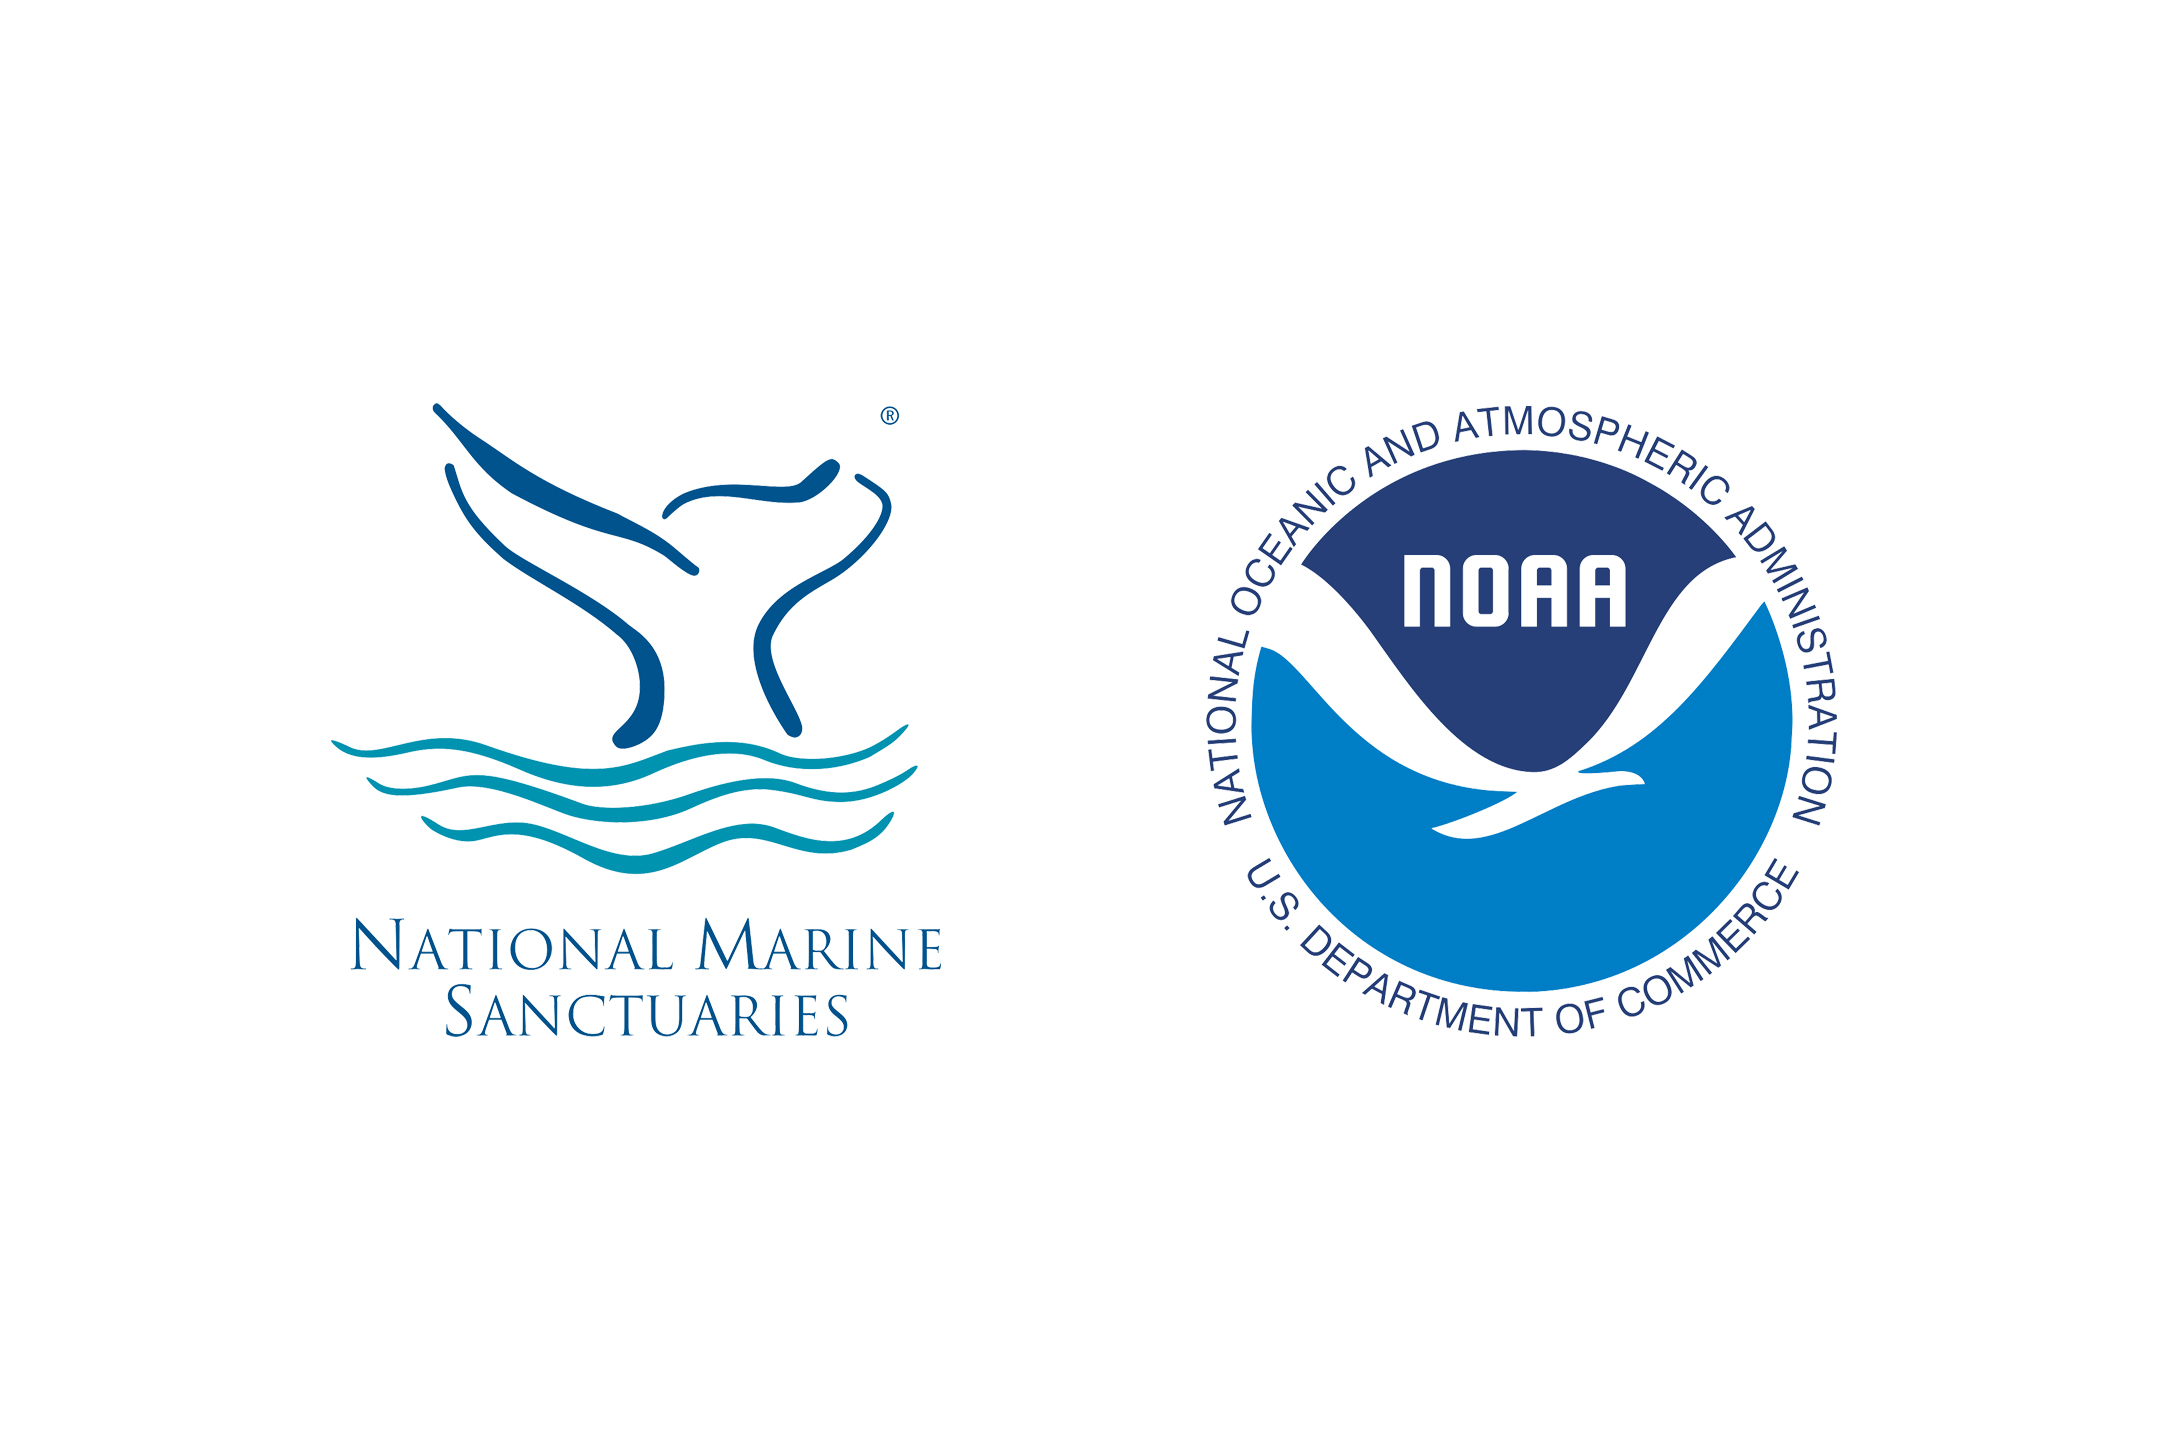 Lake Carriers' Association - LCA - National Marine Sanctuaries & National Oceanic and Atmospheric Administration